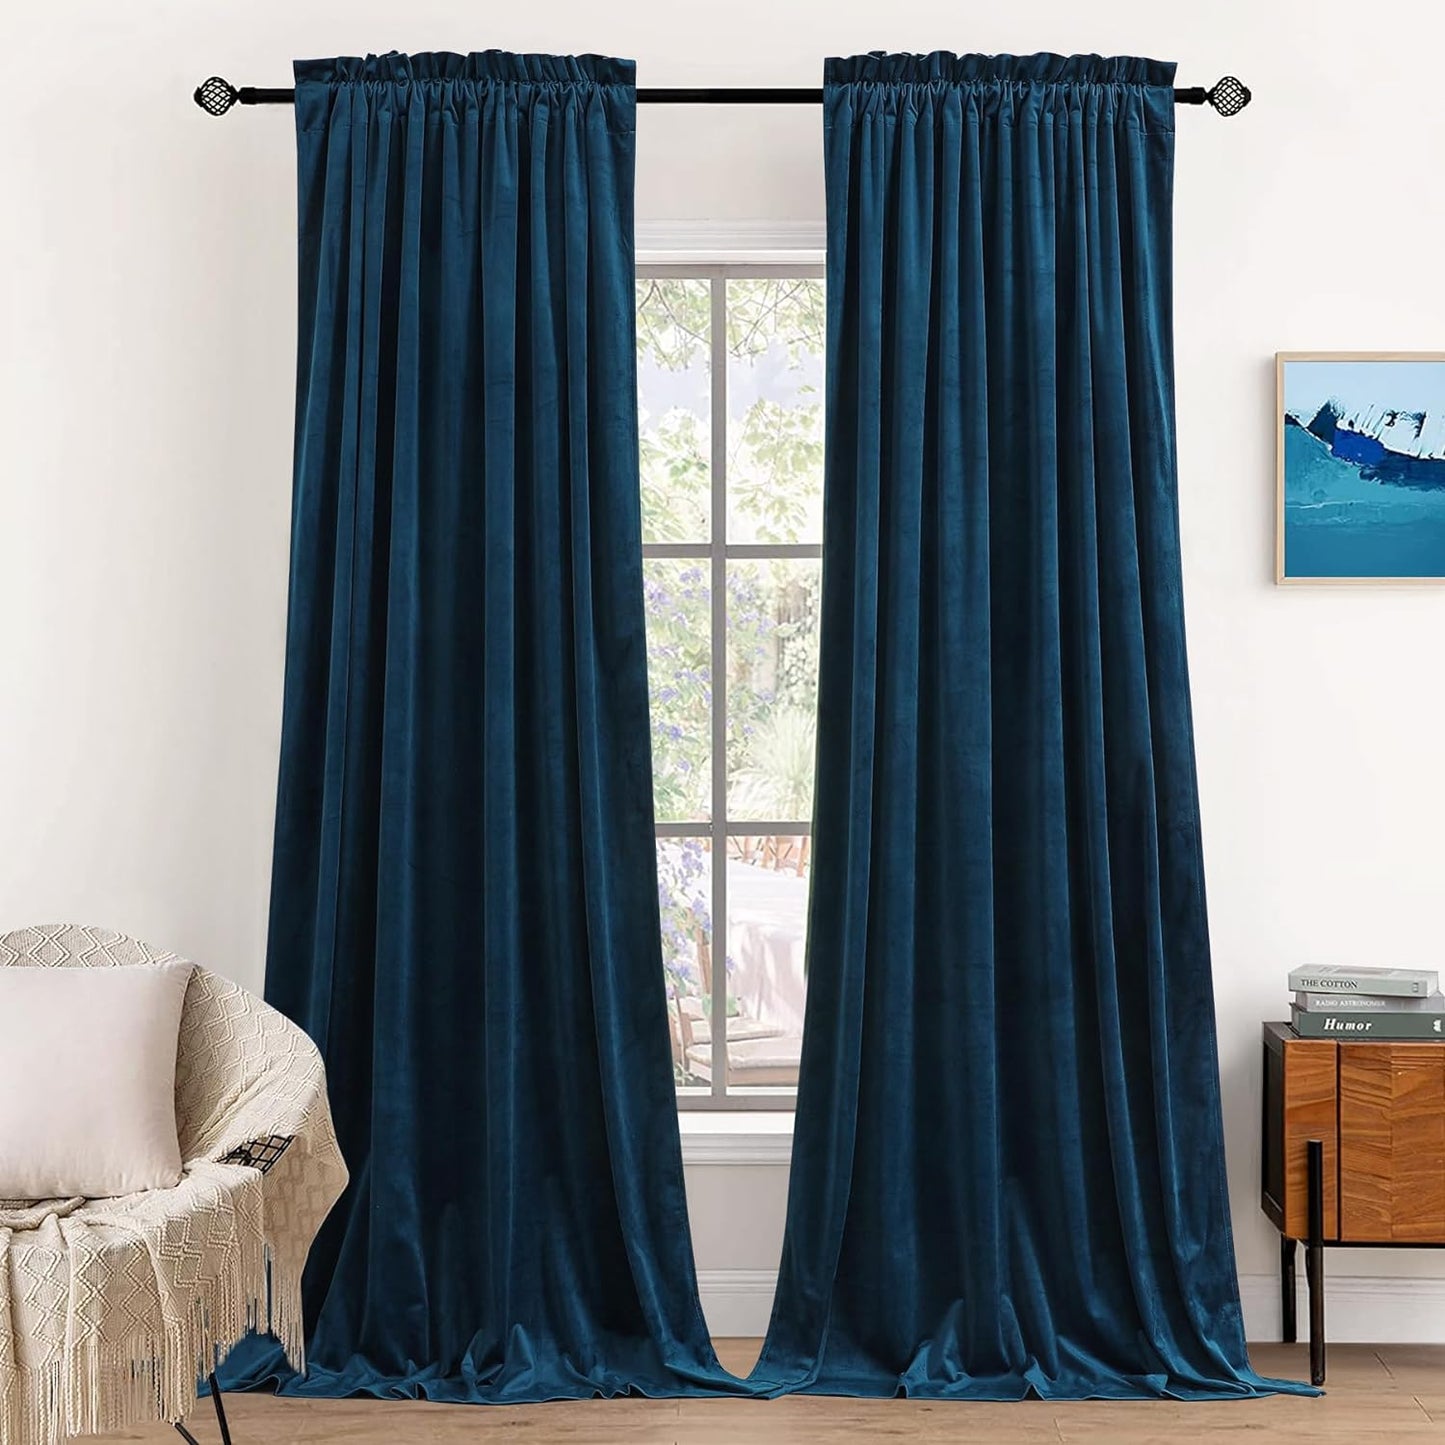 Dchola Olive Green Velvet Curtains for Bedroom Window, Super Soft Vintage Luxury Heavy Drapes, Room Darkening Rod Pocket Curtain for Living Room, W52 by L84 Inches, 2 Panels  Dchola Navy Blue W52*L63 